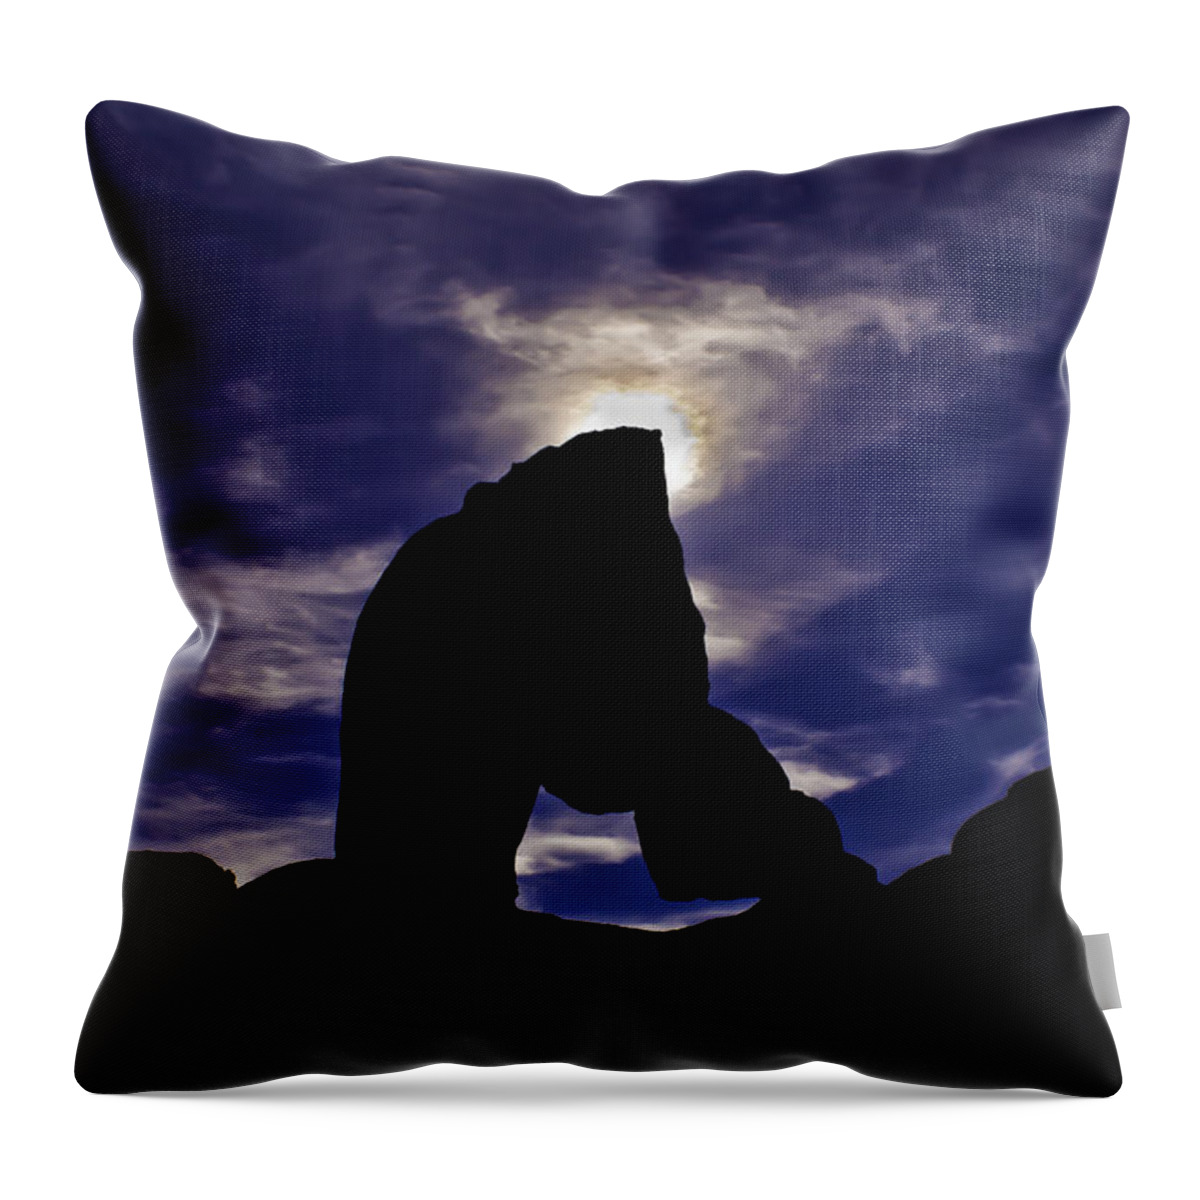 Blm Throw Pillow featuring the photograph Alabama Hills Arch Silhouette by Sherri Meyer